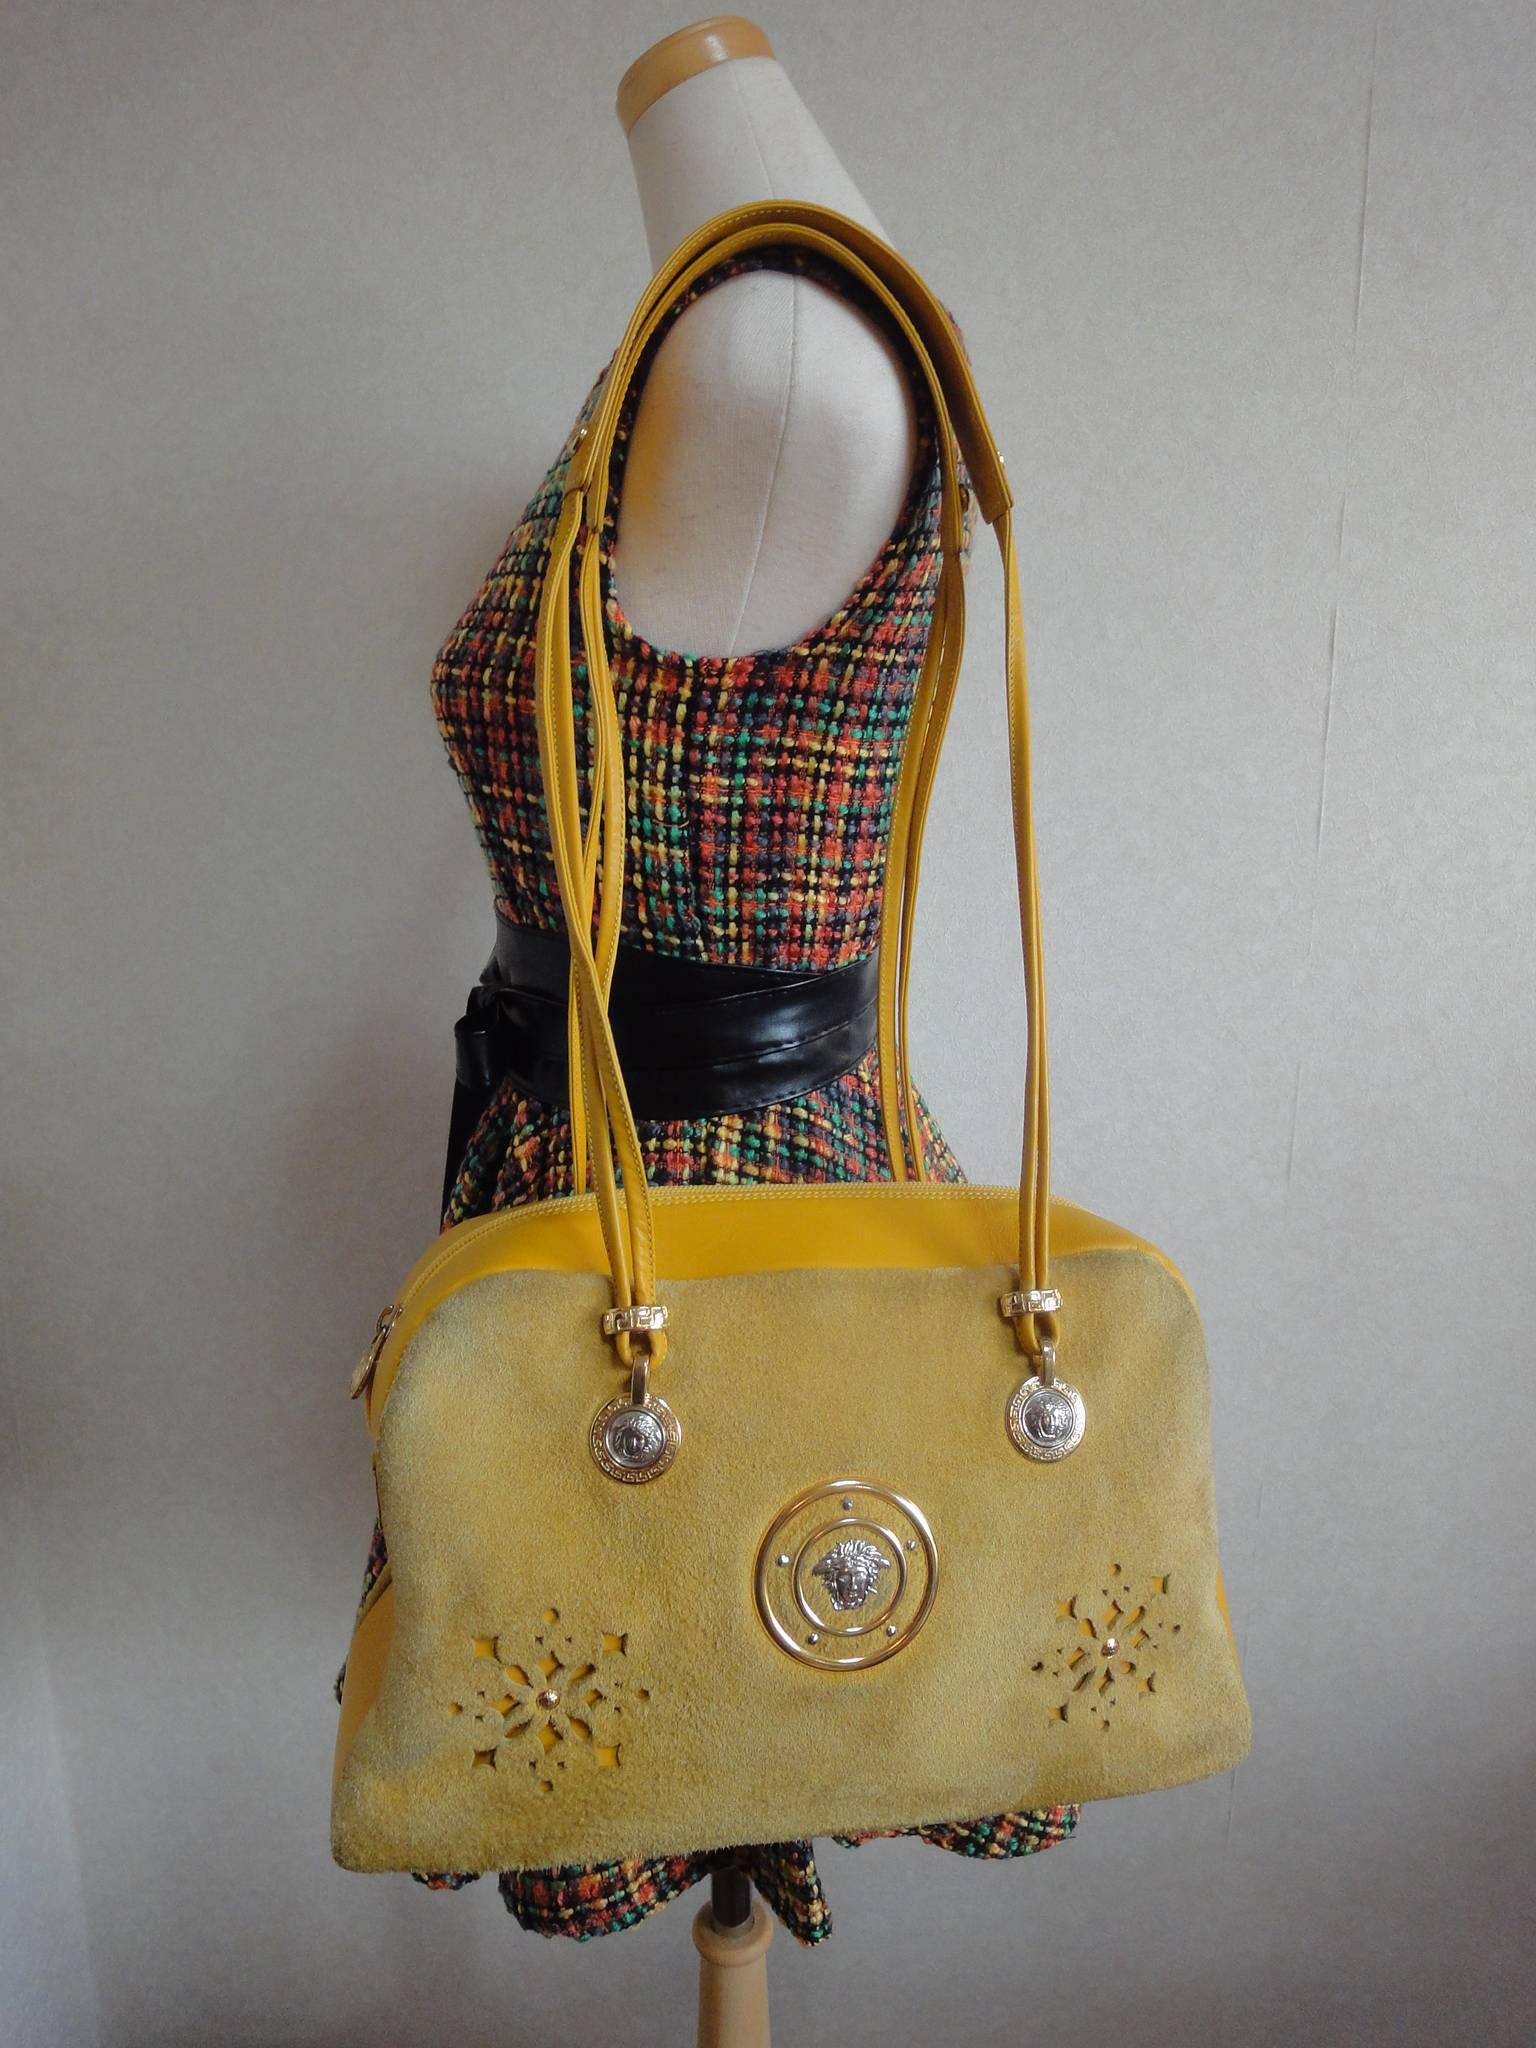 Vintage rare Gianni Versace yellow suede and leather bag with cut out design. 2